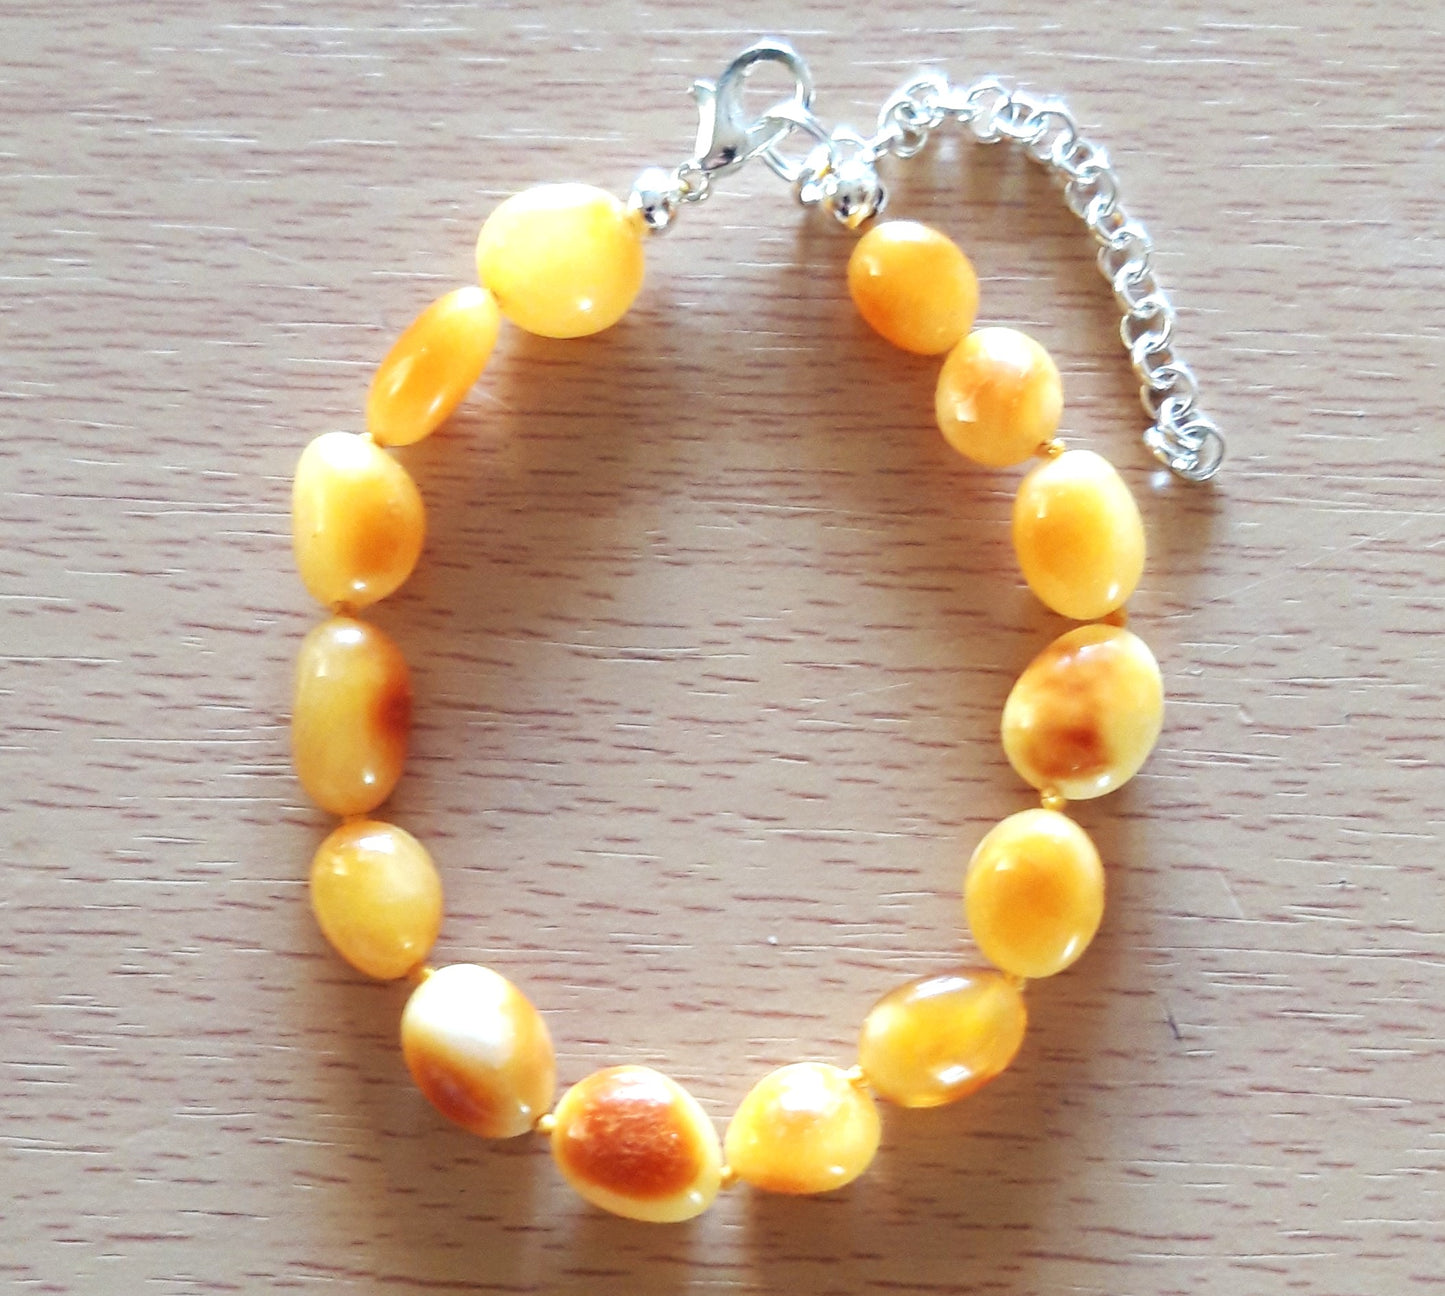 Baltic amber necklace and bracelet for adult